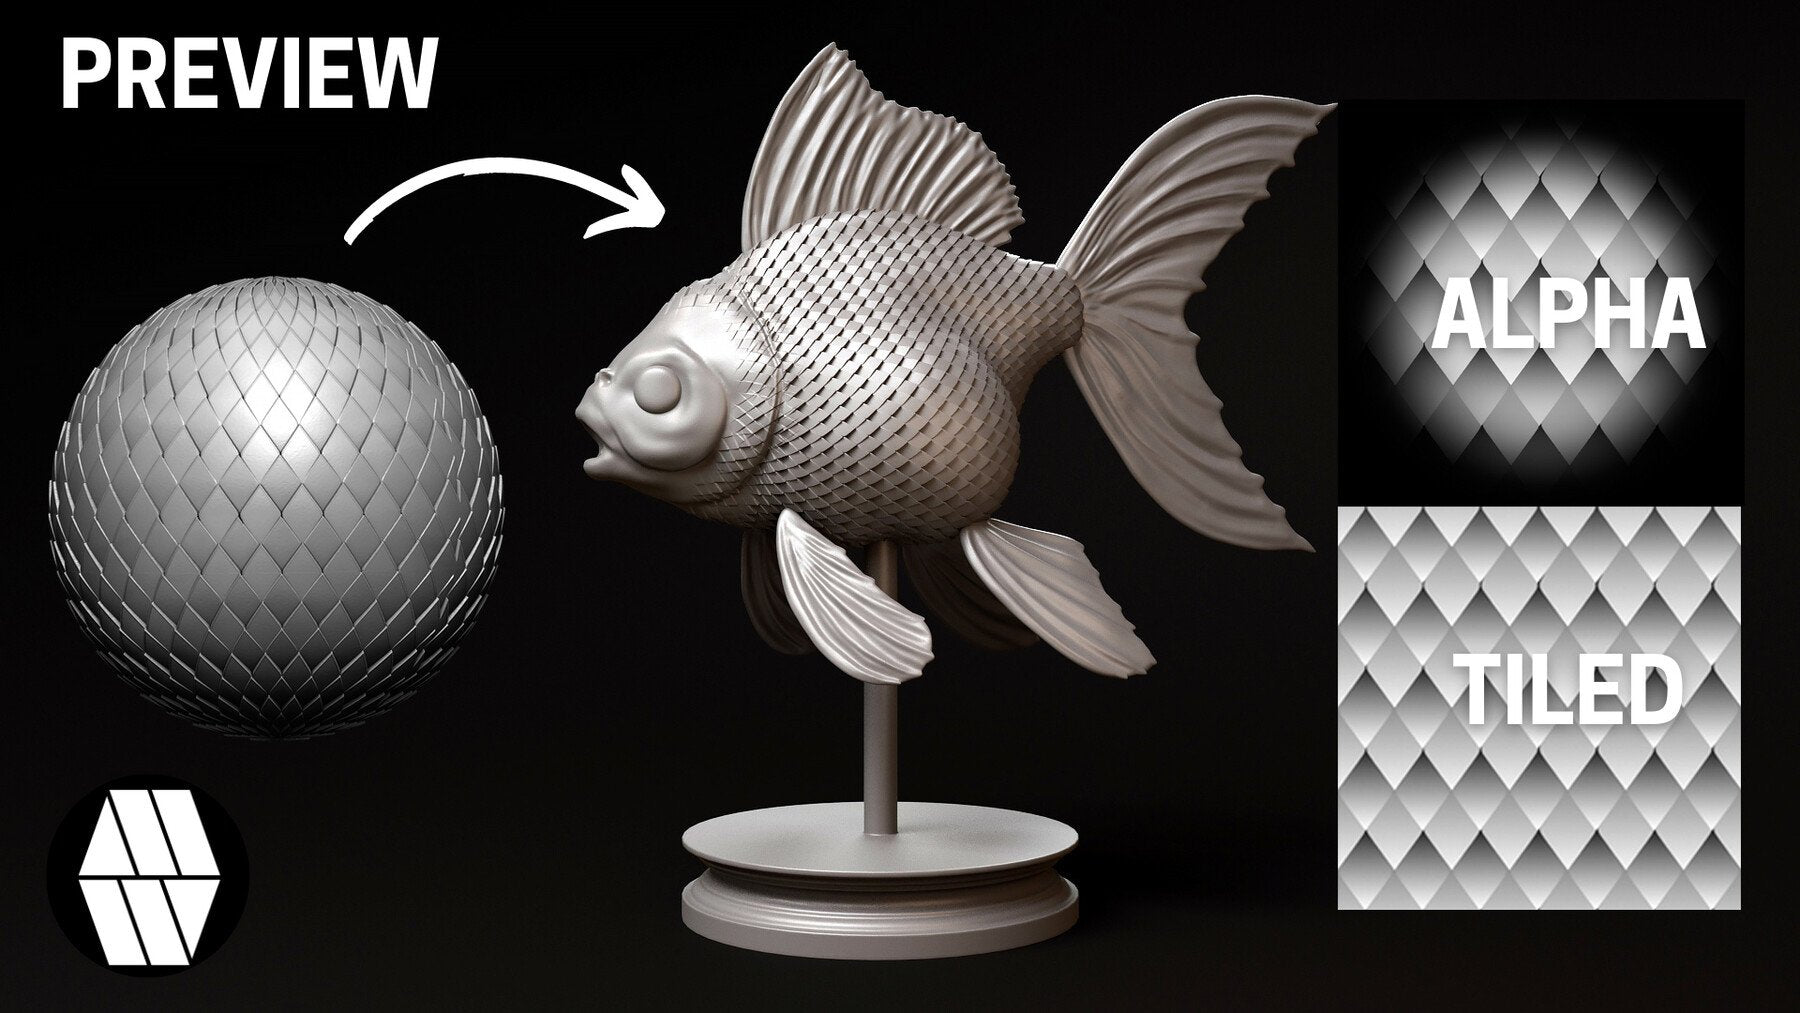 20 Scale Tiled Alphas for ZBrush